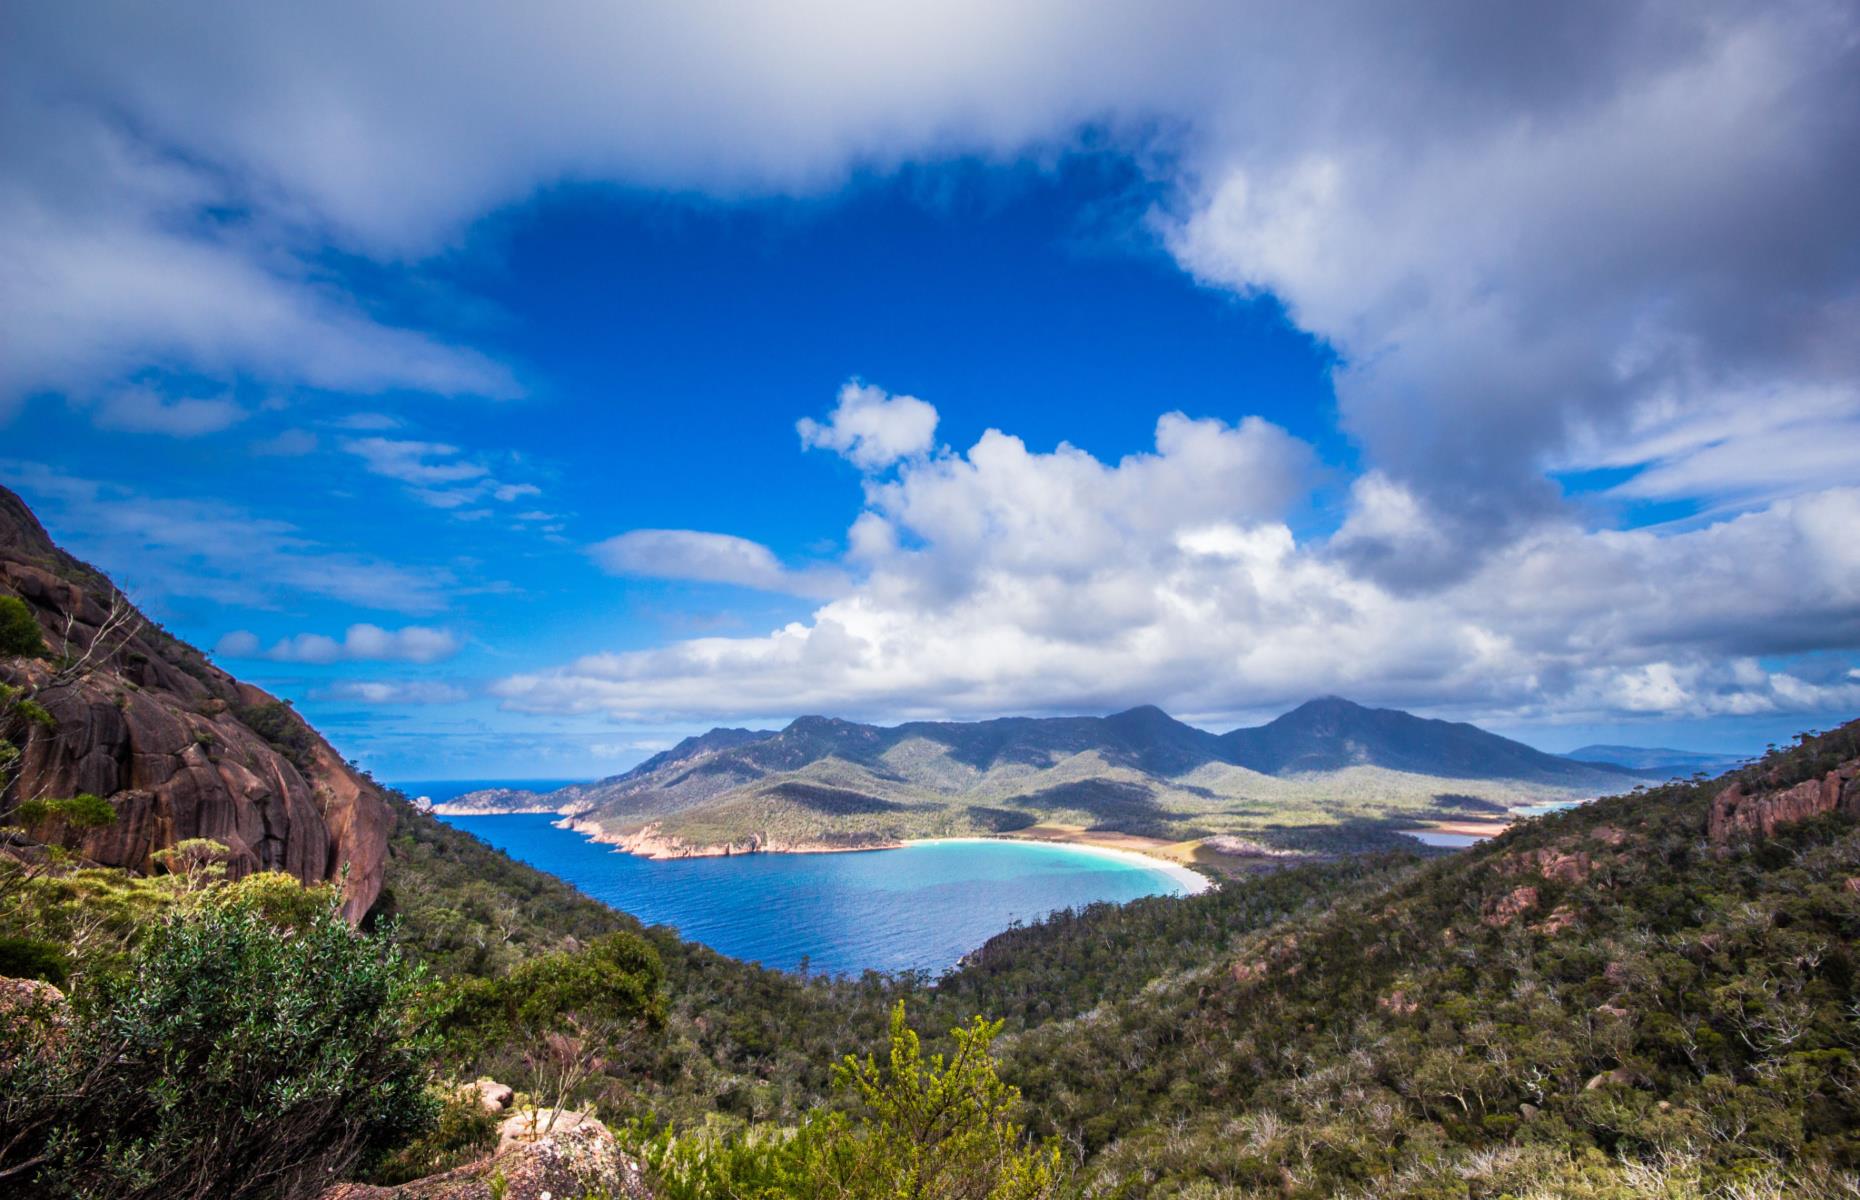 <p>Tasmania’s <a href="https://parks.tas.gov.au/explore-our-parks/freycinet-national-park">Freycinet National Park</a> doesn’t have a landmark like the famous Uluru rock monolith, but it makes up for it with some sublime coastal views. The must-see attraction here is the curved white sand coastline of Wineglass Bay and the long narrow peninsula has plenty of other gems along its shores. It’s not all beaches and turquoise waters: Freycinet also has some interesting terrain in the form of the Hazards, a range of pink granite mountains.</p>